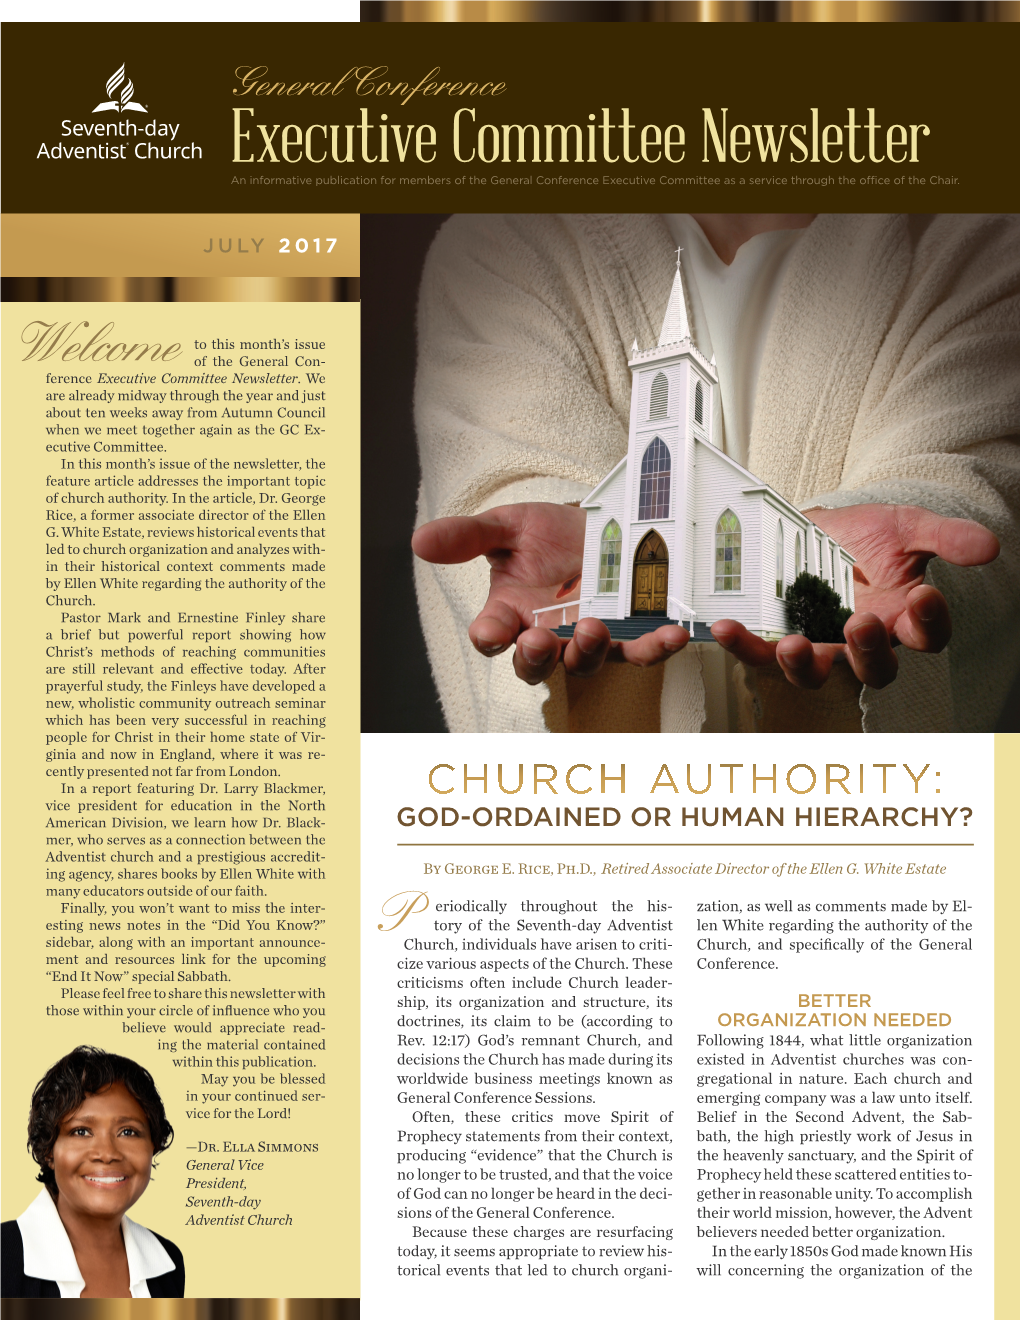 Executive Committee Newsletter an Informative Publication for Members of the General Conference Executive Committee As a Service Through the Office of the Chair